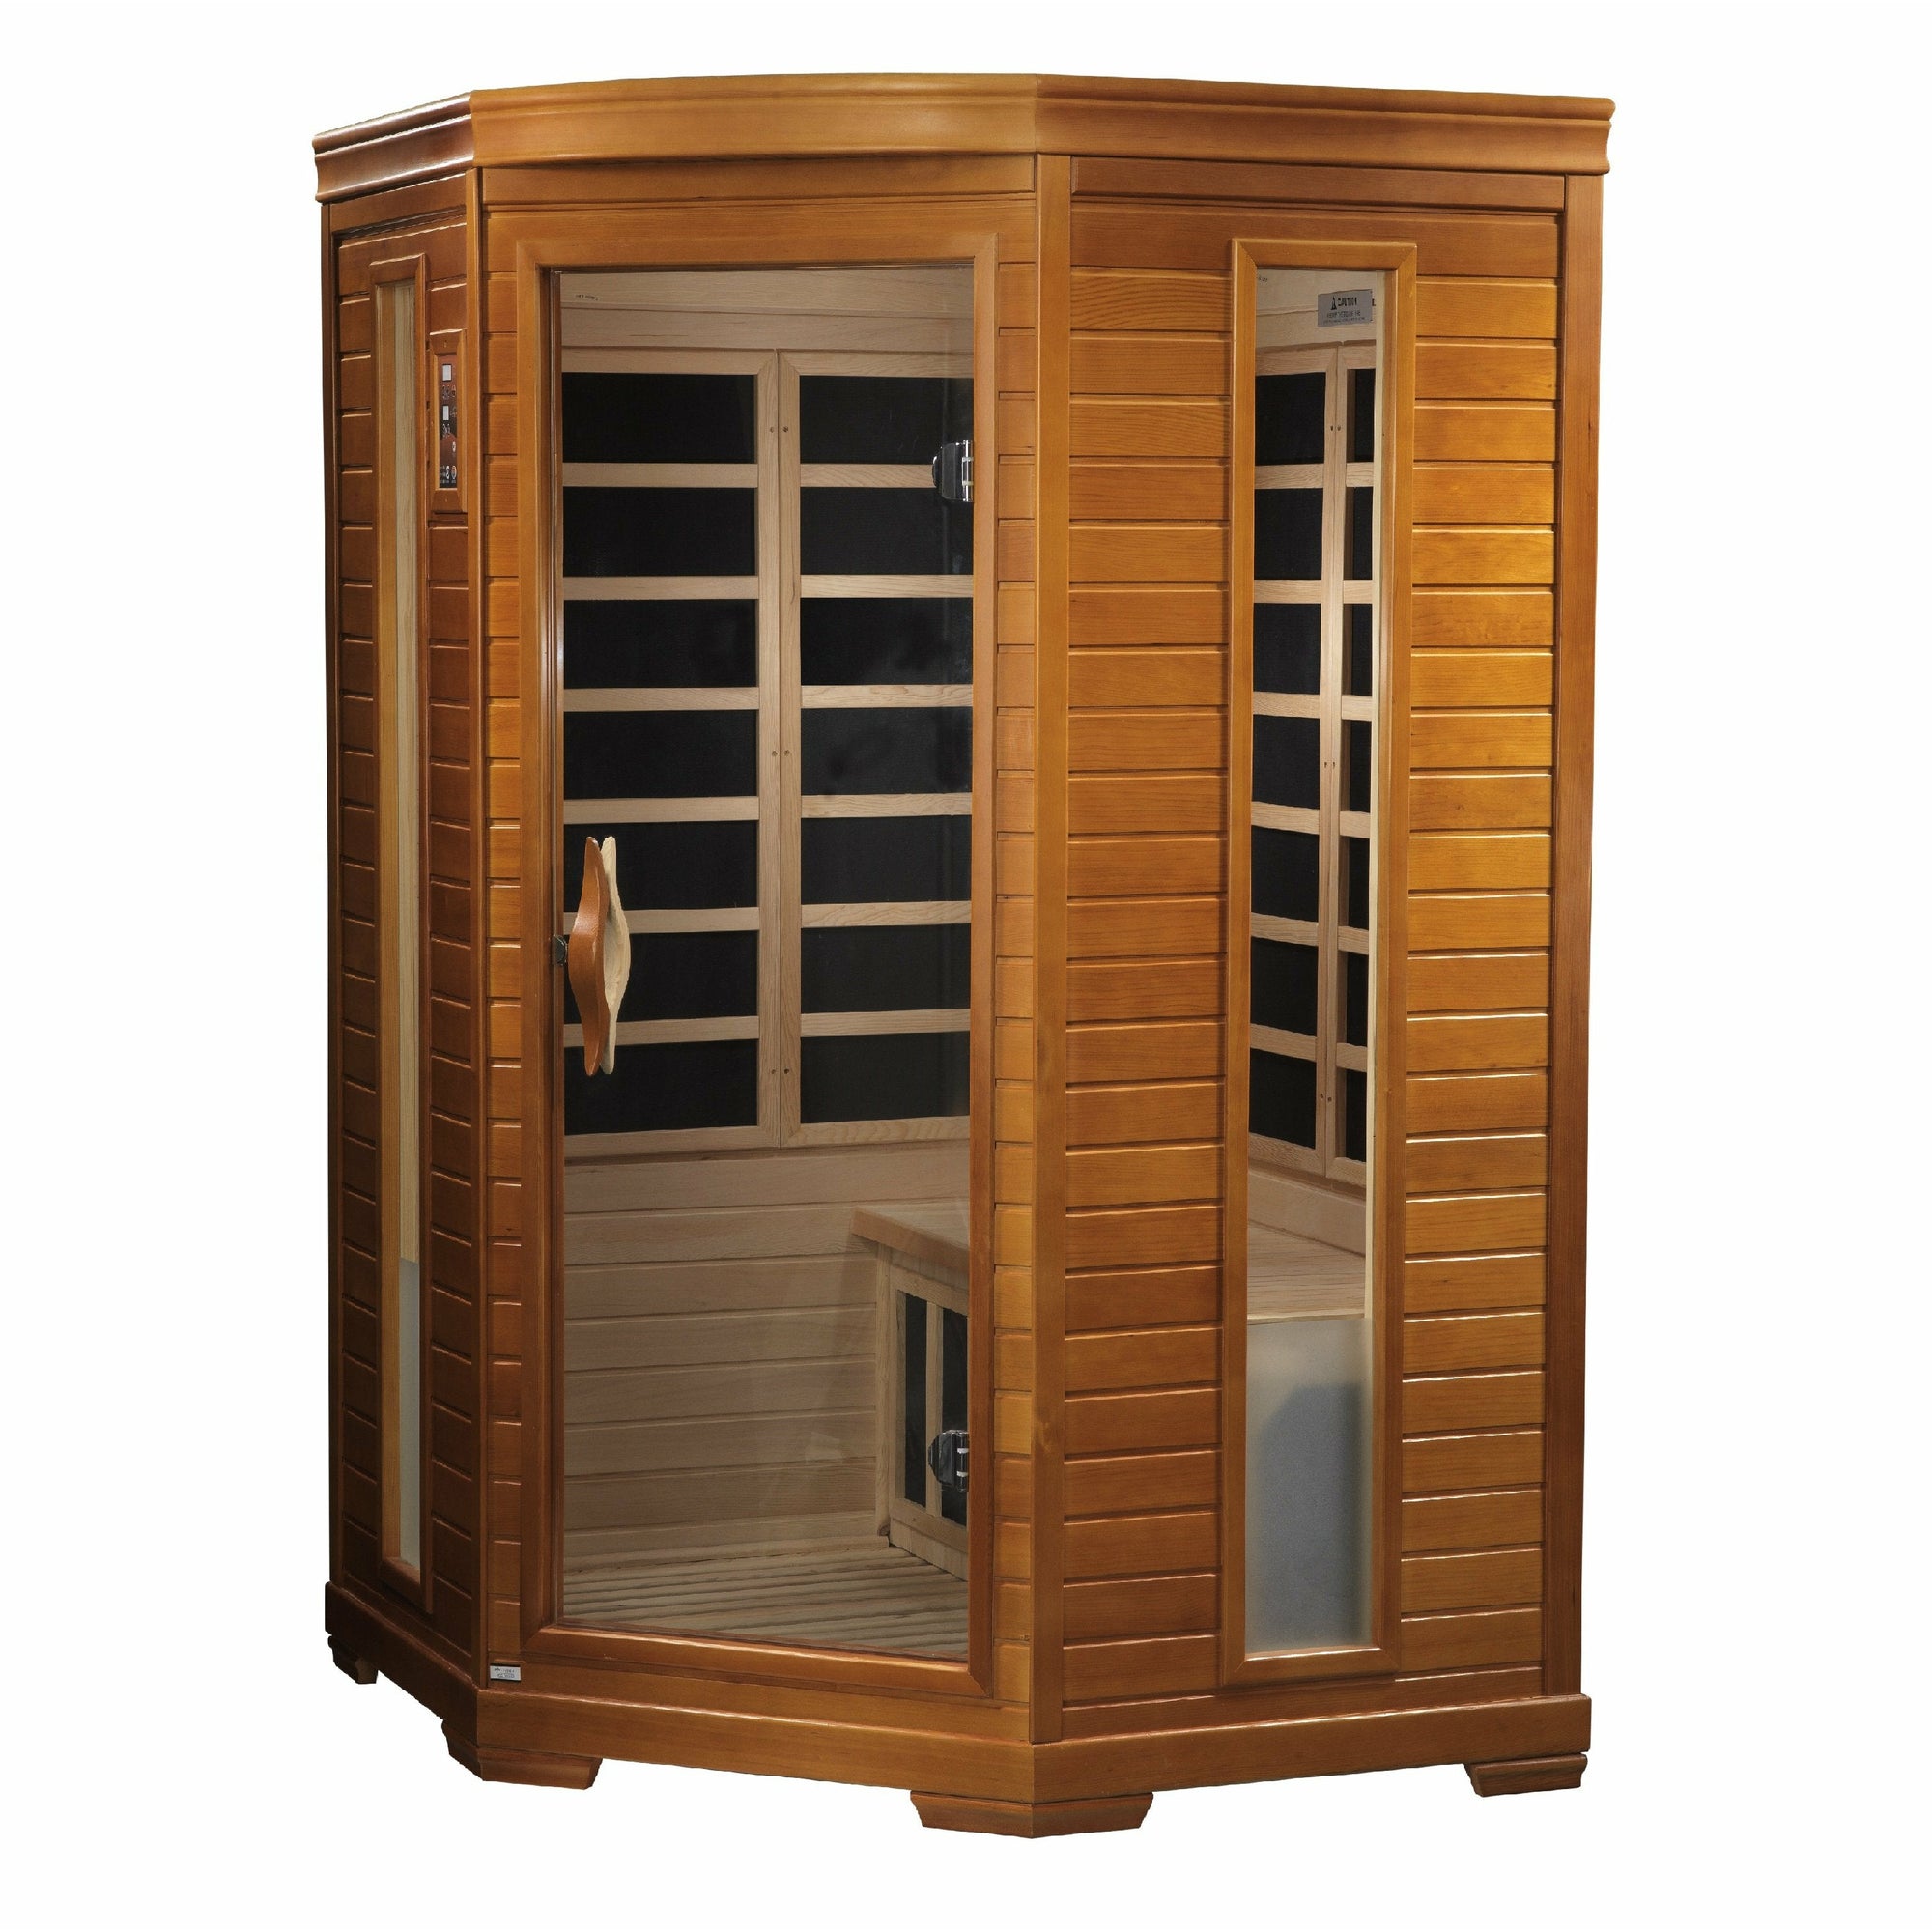 Dynamic Heming Edition Low EMF Far Infrared Sauna 2 - Person Natural hemlock wood construction Roof vent with Tempered glass door front view in white background